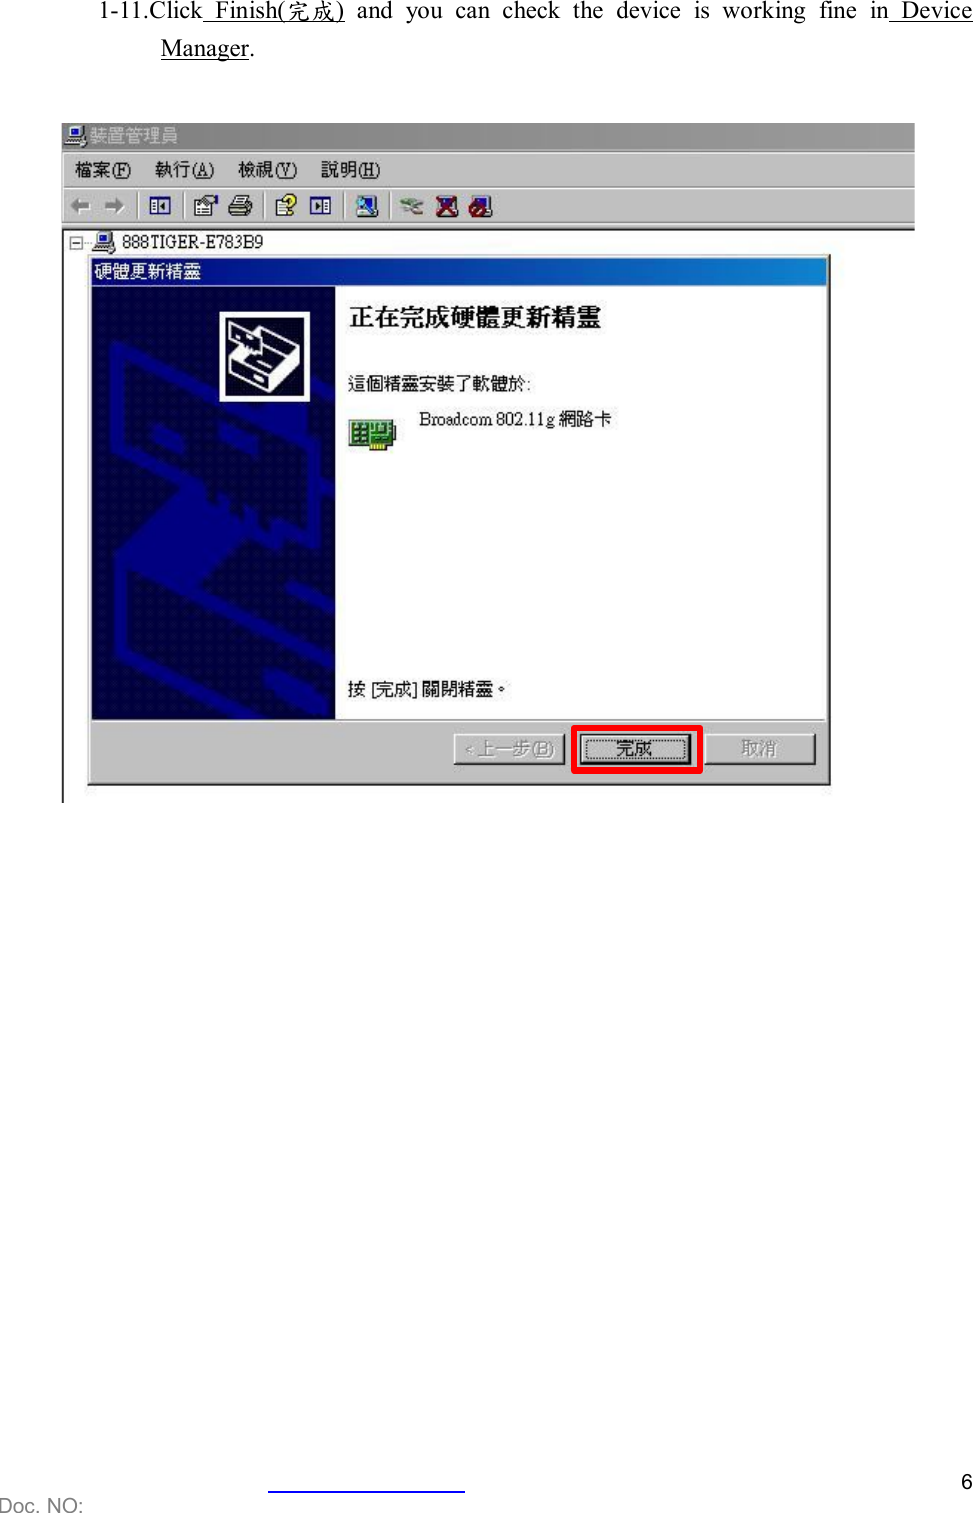    Doc. NO:   6  1-11.Click  Finish(完成)  and  you  can  check  the  device  is  working  fine  in  Device Manager.                    